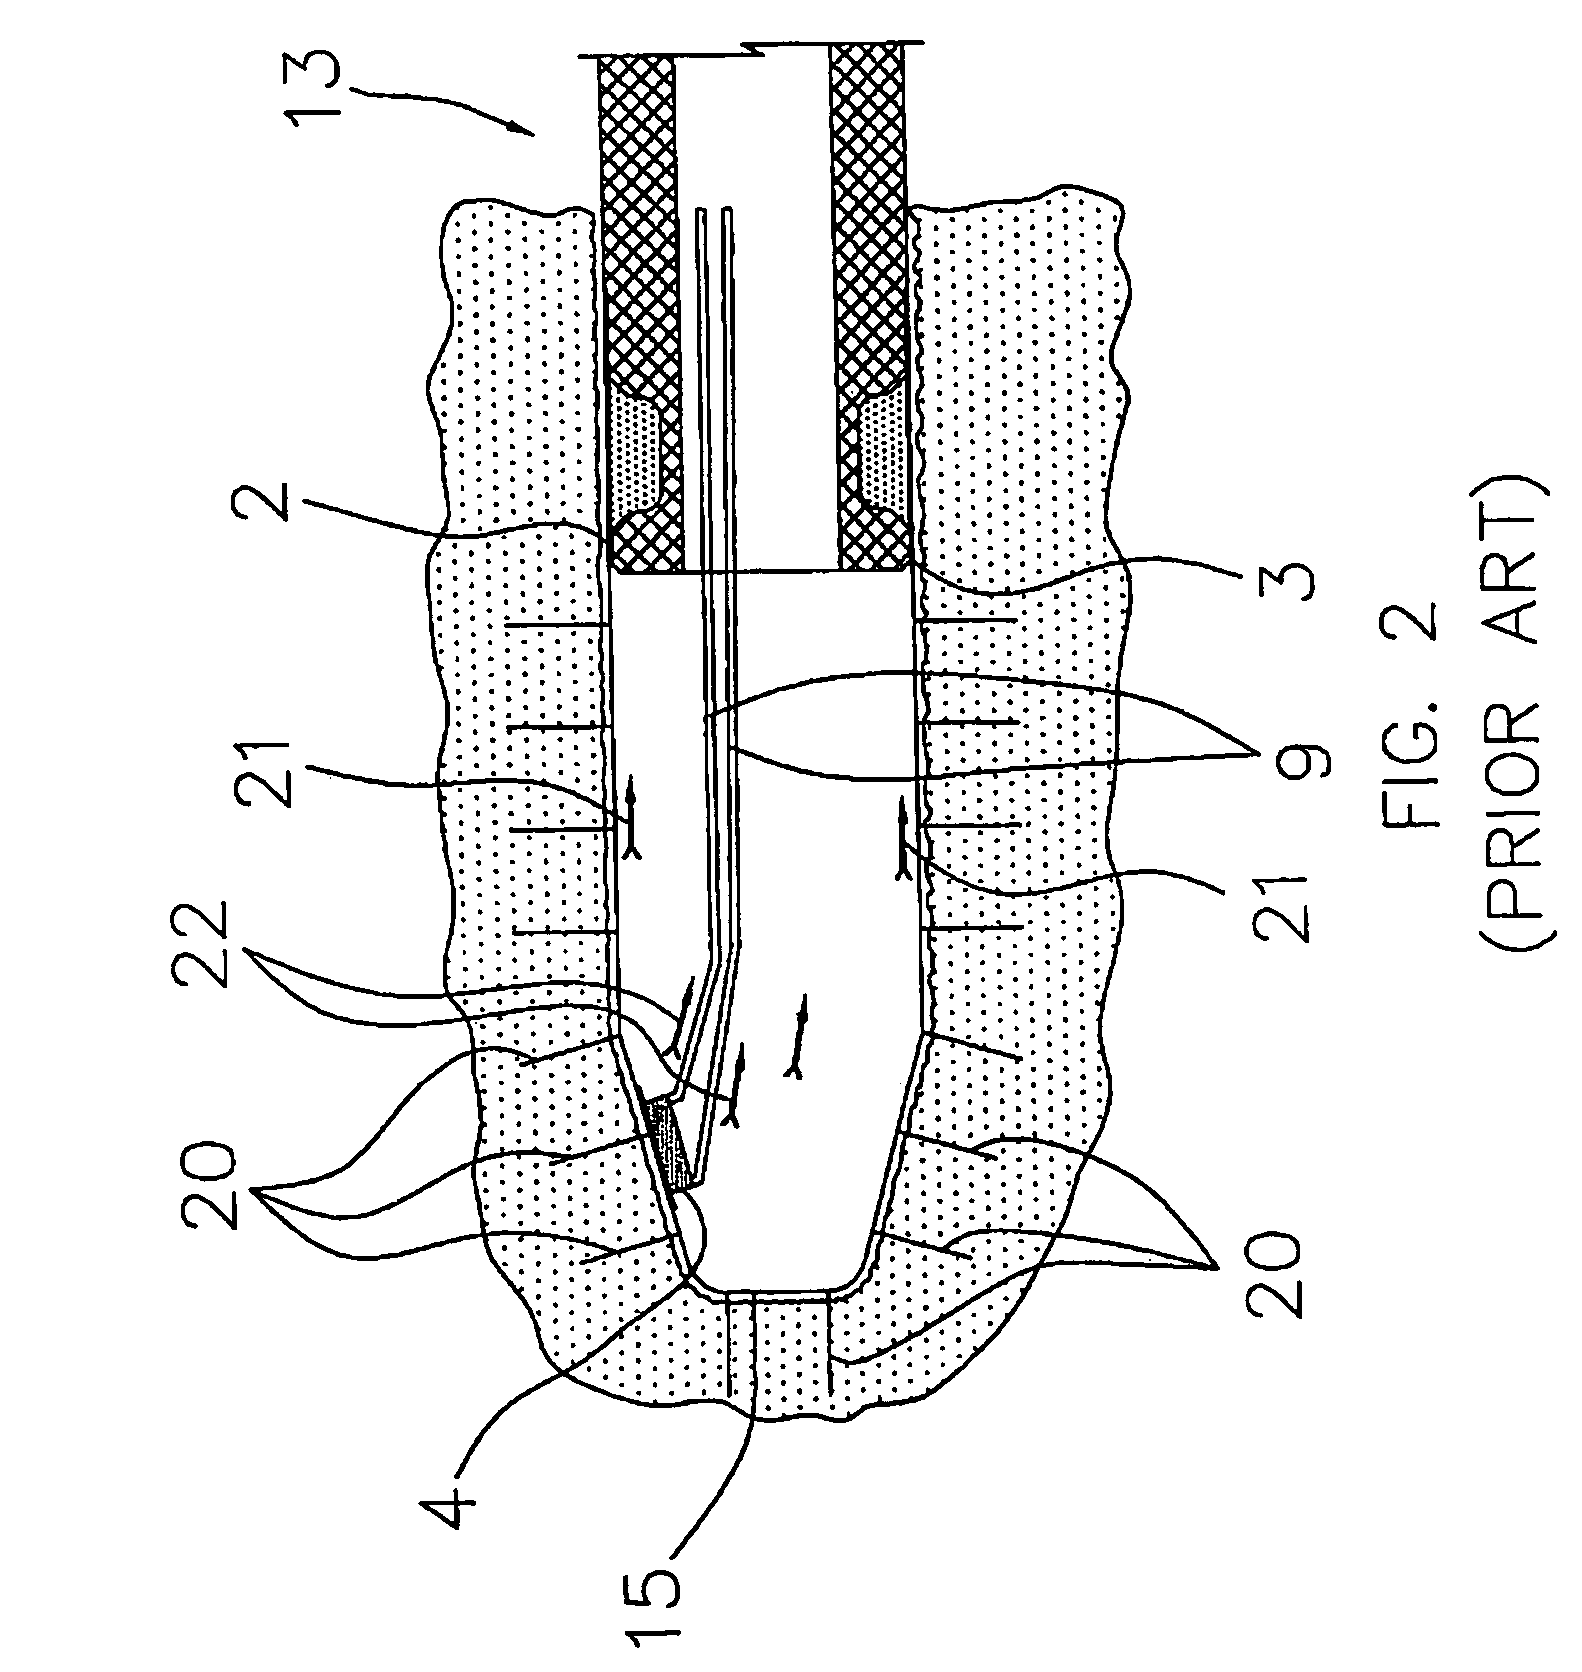 Temperature probe and thermometer having the same